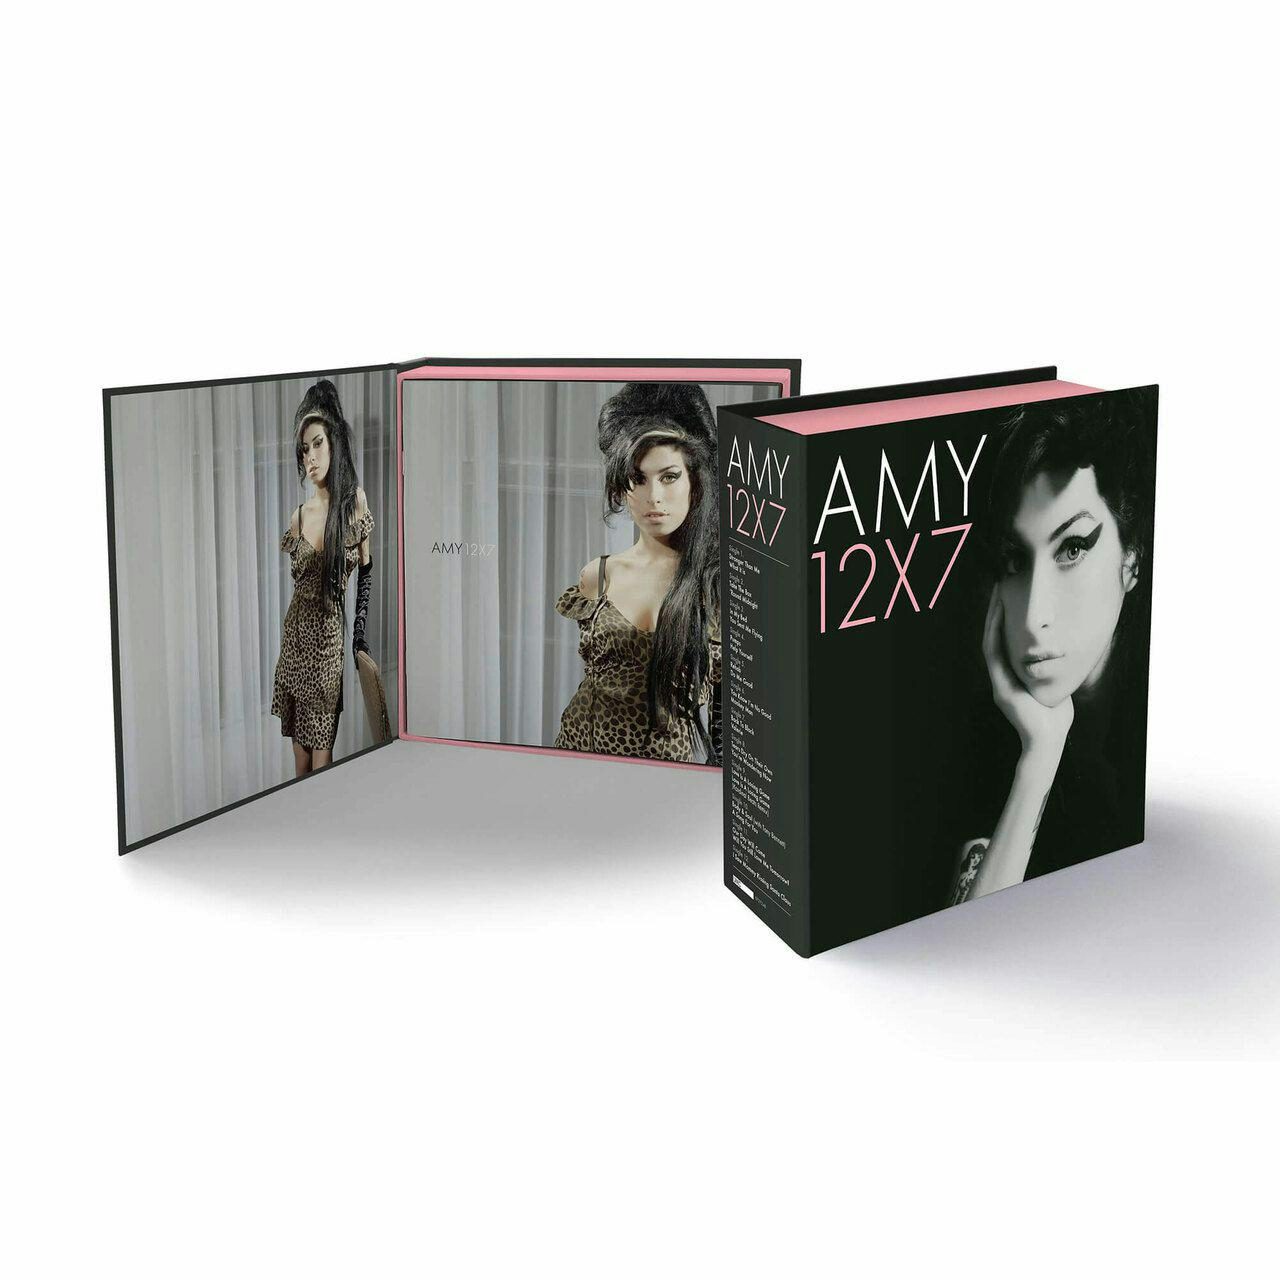 Amy Winehouse 12x7: The Singles Collection (Box Set) Vinyl Record